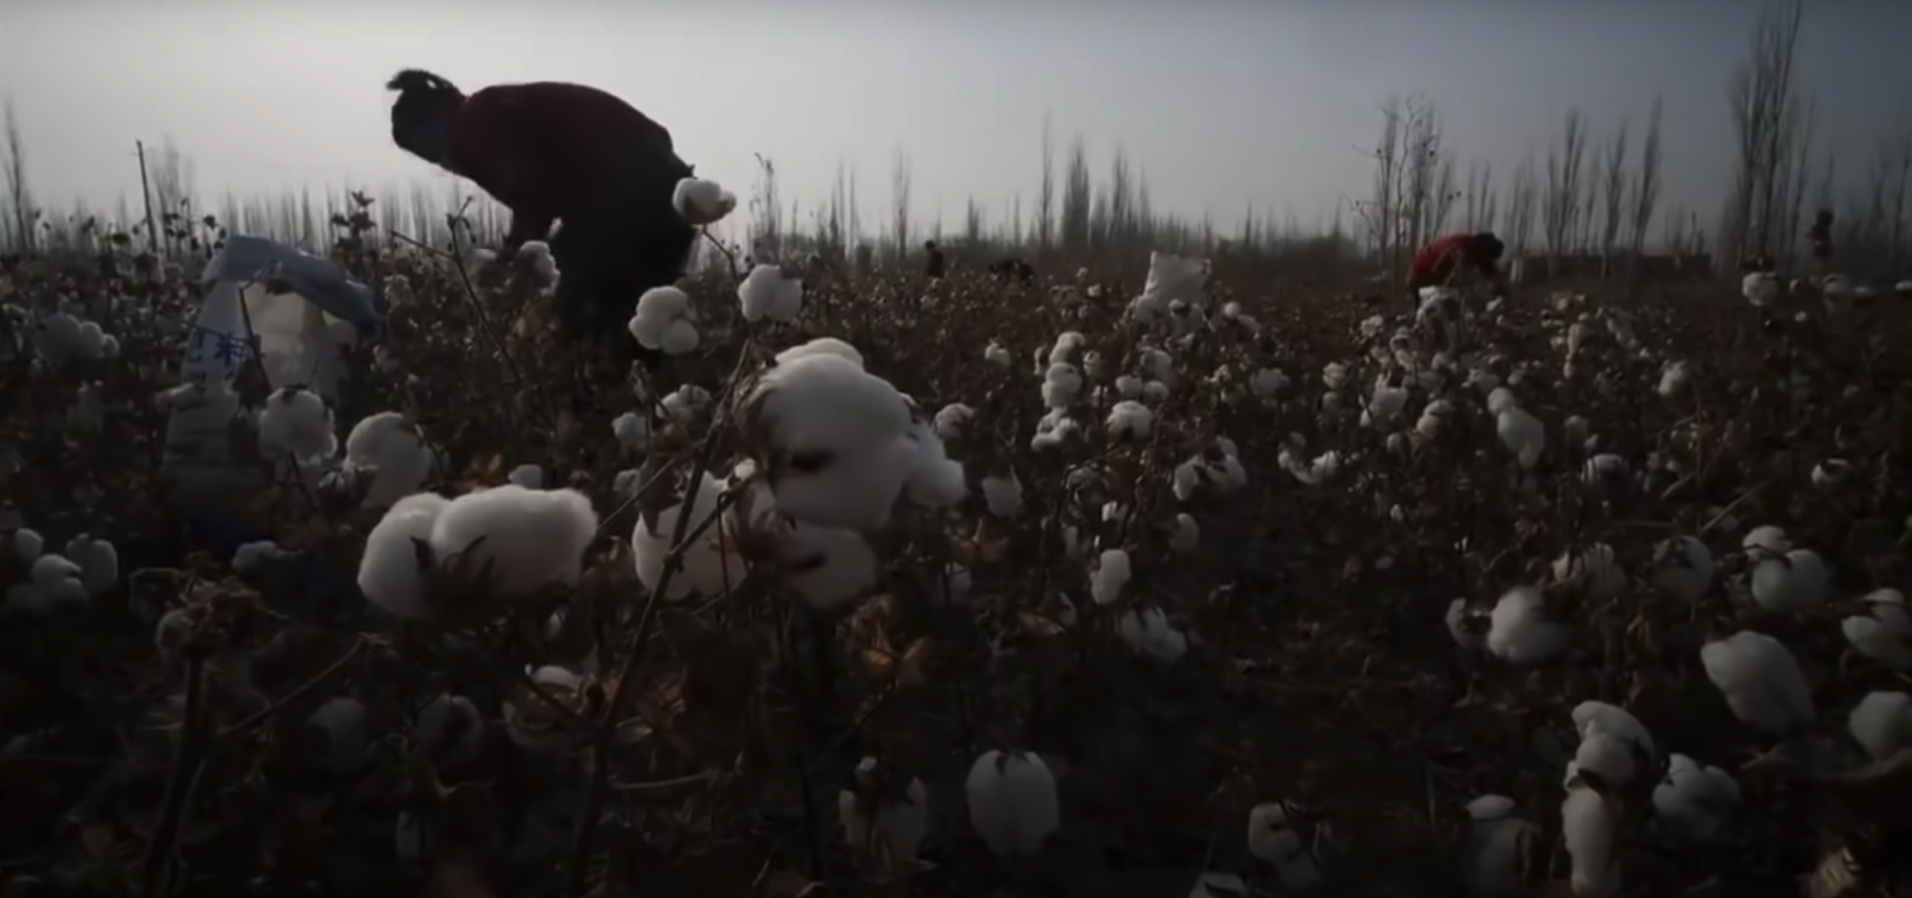 Uyghur prisoners are forced to pick cotton, according to the State Department and other agencies. [YouTube/Screenshot/BBCNews]